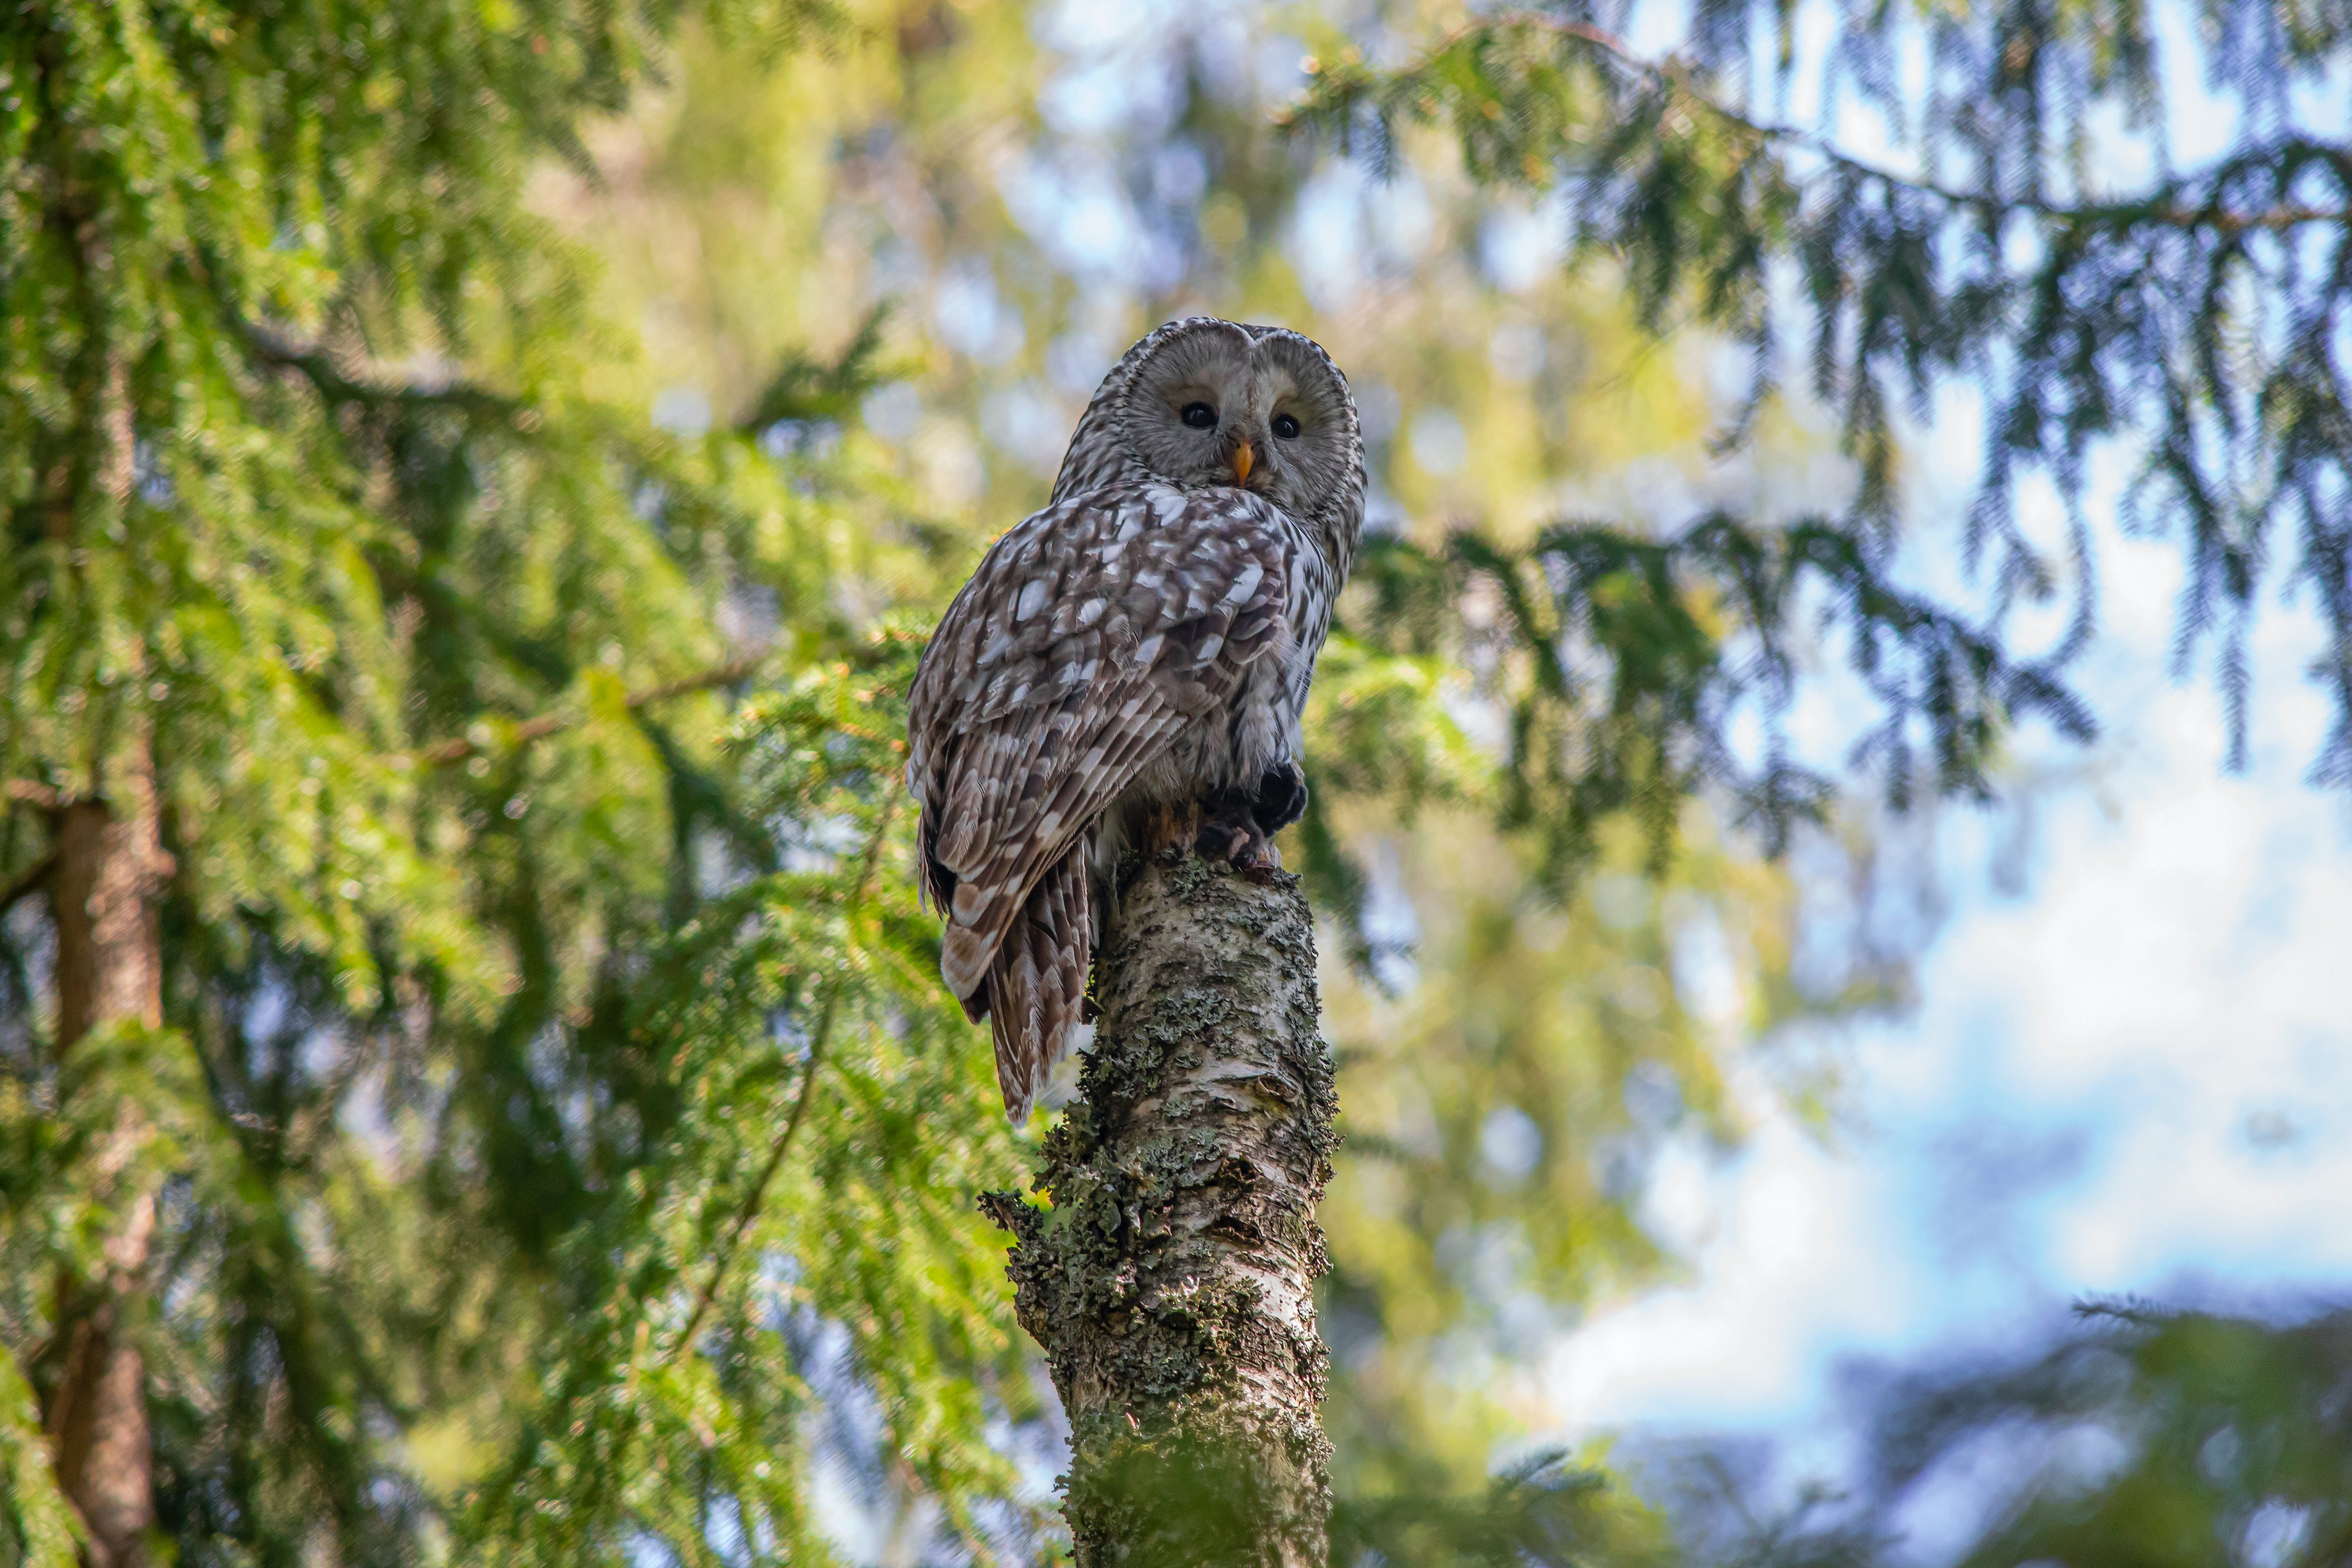 Clock is Ticking on Disastrous Spotted Owl Policy